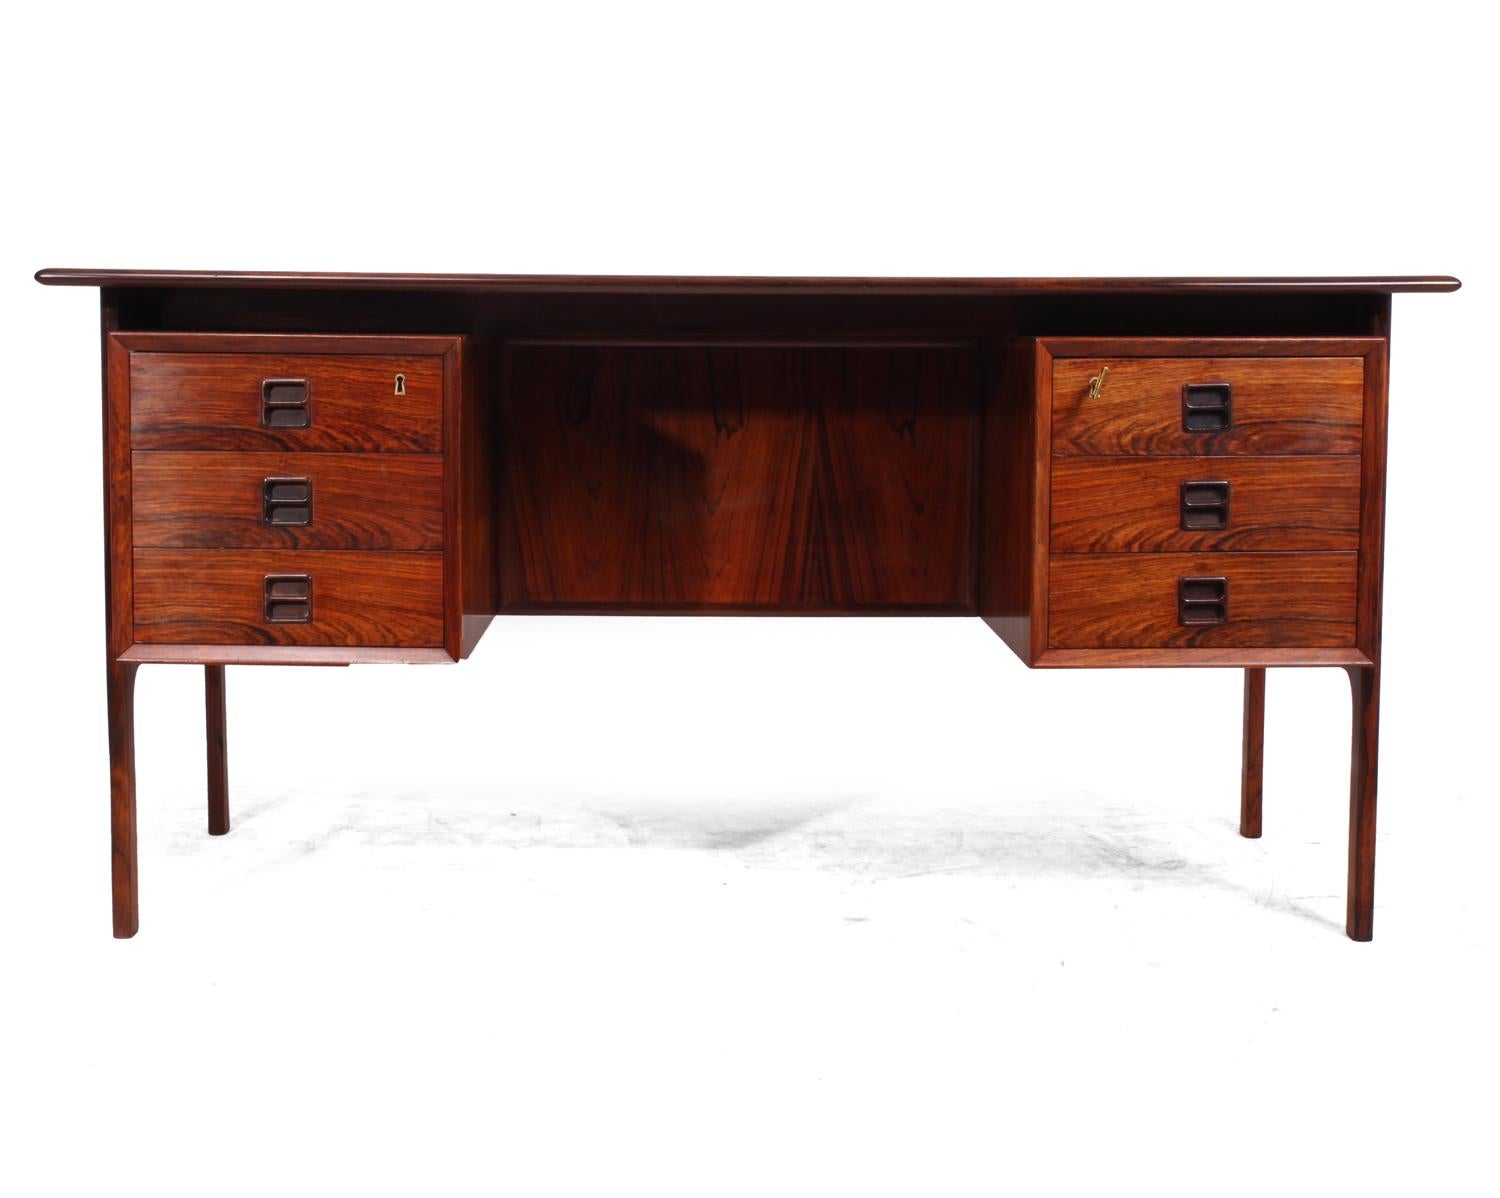 Midcentury rosewood desk by Arne Vodder
A midcentury desk produced in Denmark in the 1960s by Arne Vodder, it has six drawers top drawers are lockable 1 key supplied they have inset sculpted handles, and floating top, the desk is in excellent